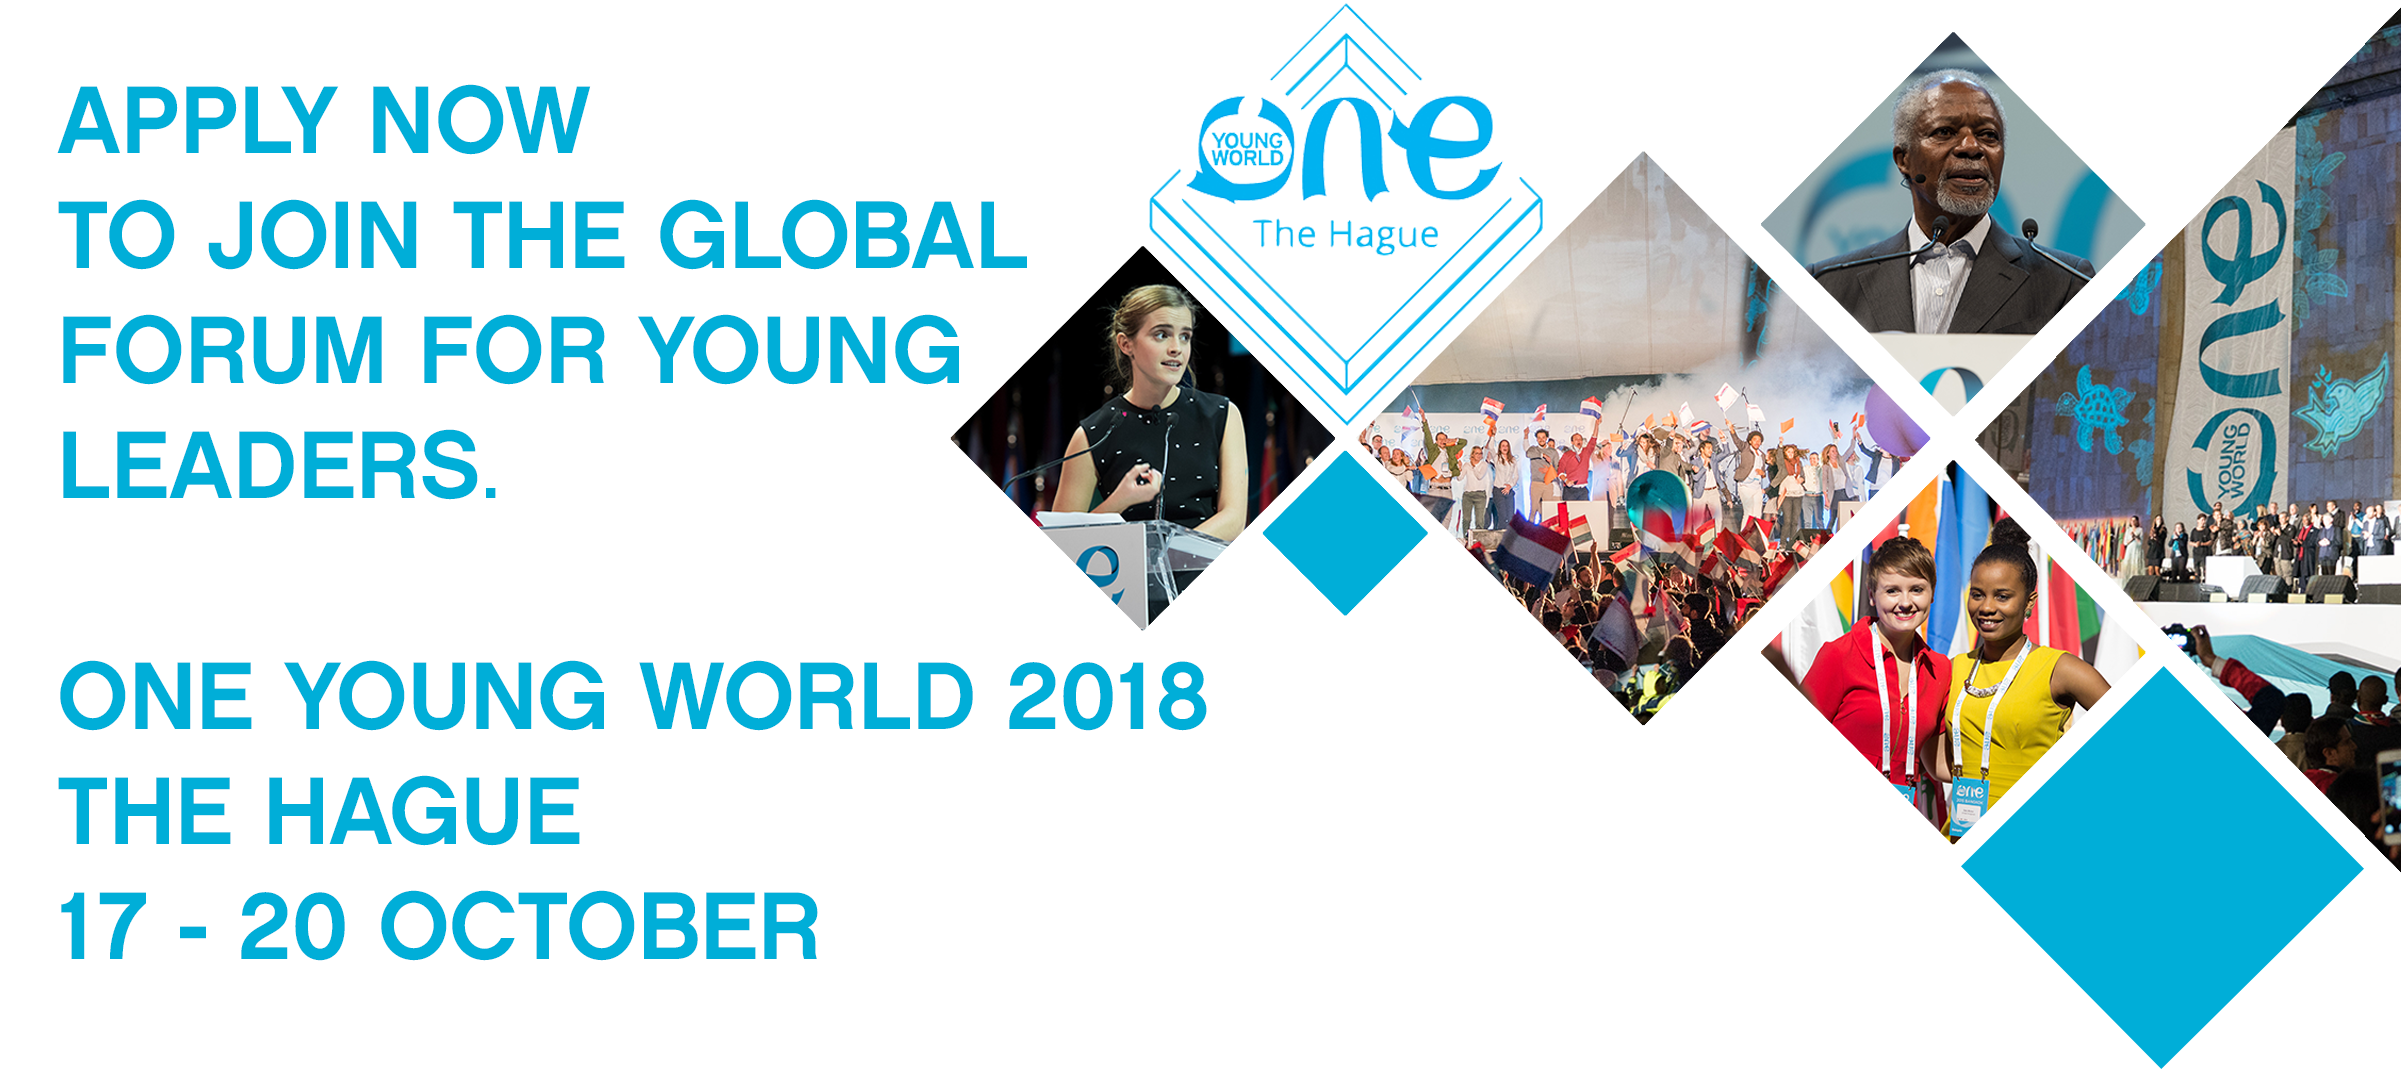 All Bar None Scholarship to attend One Young World Summit 2018 in The Hague, The Netherlands